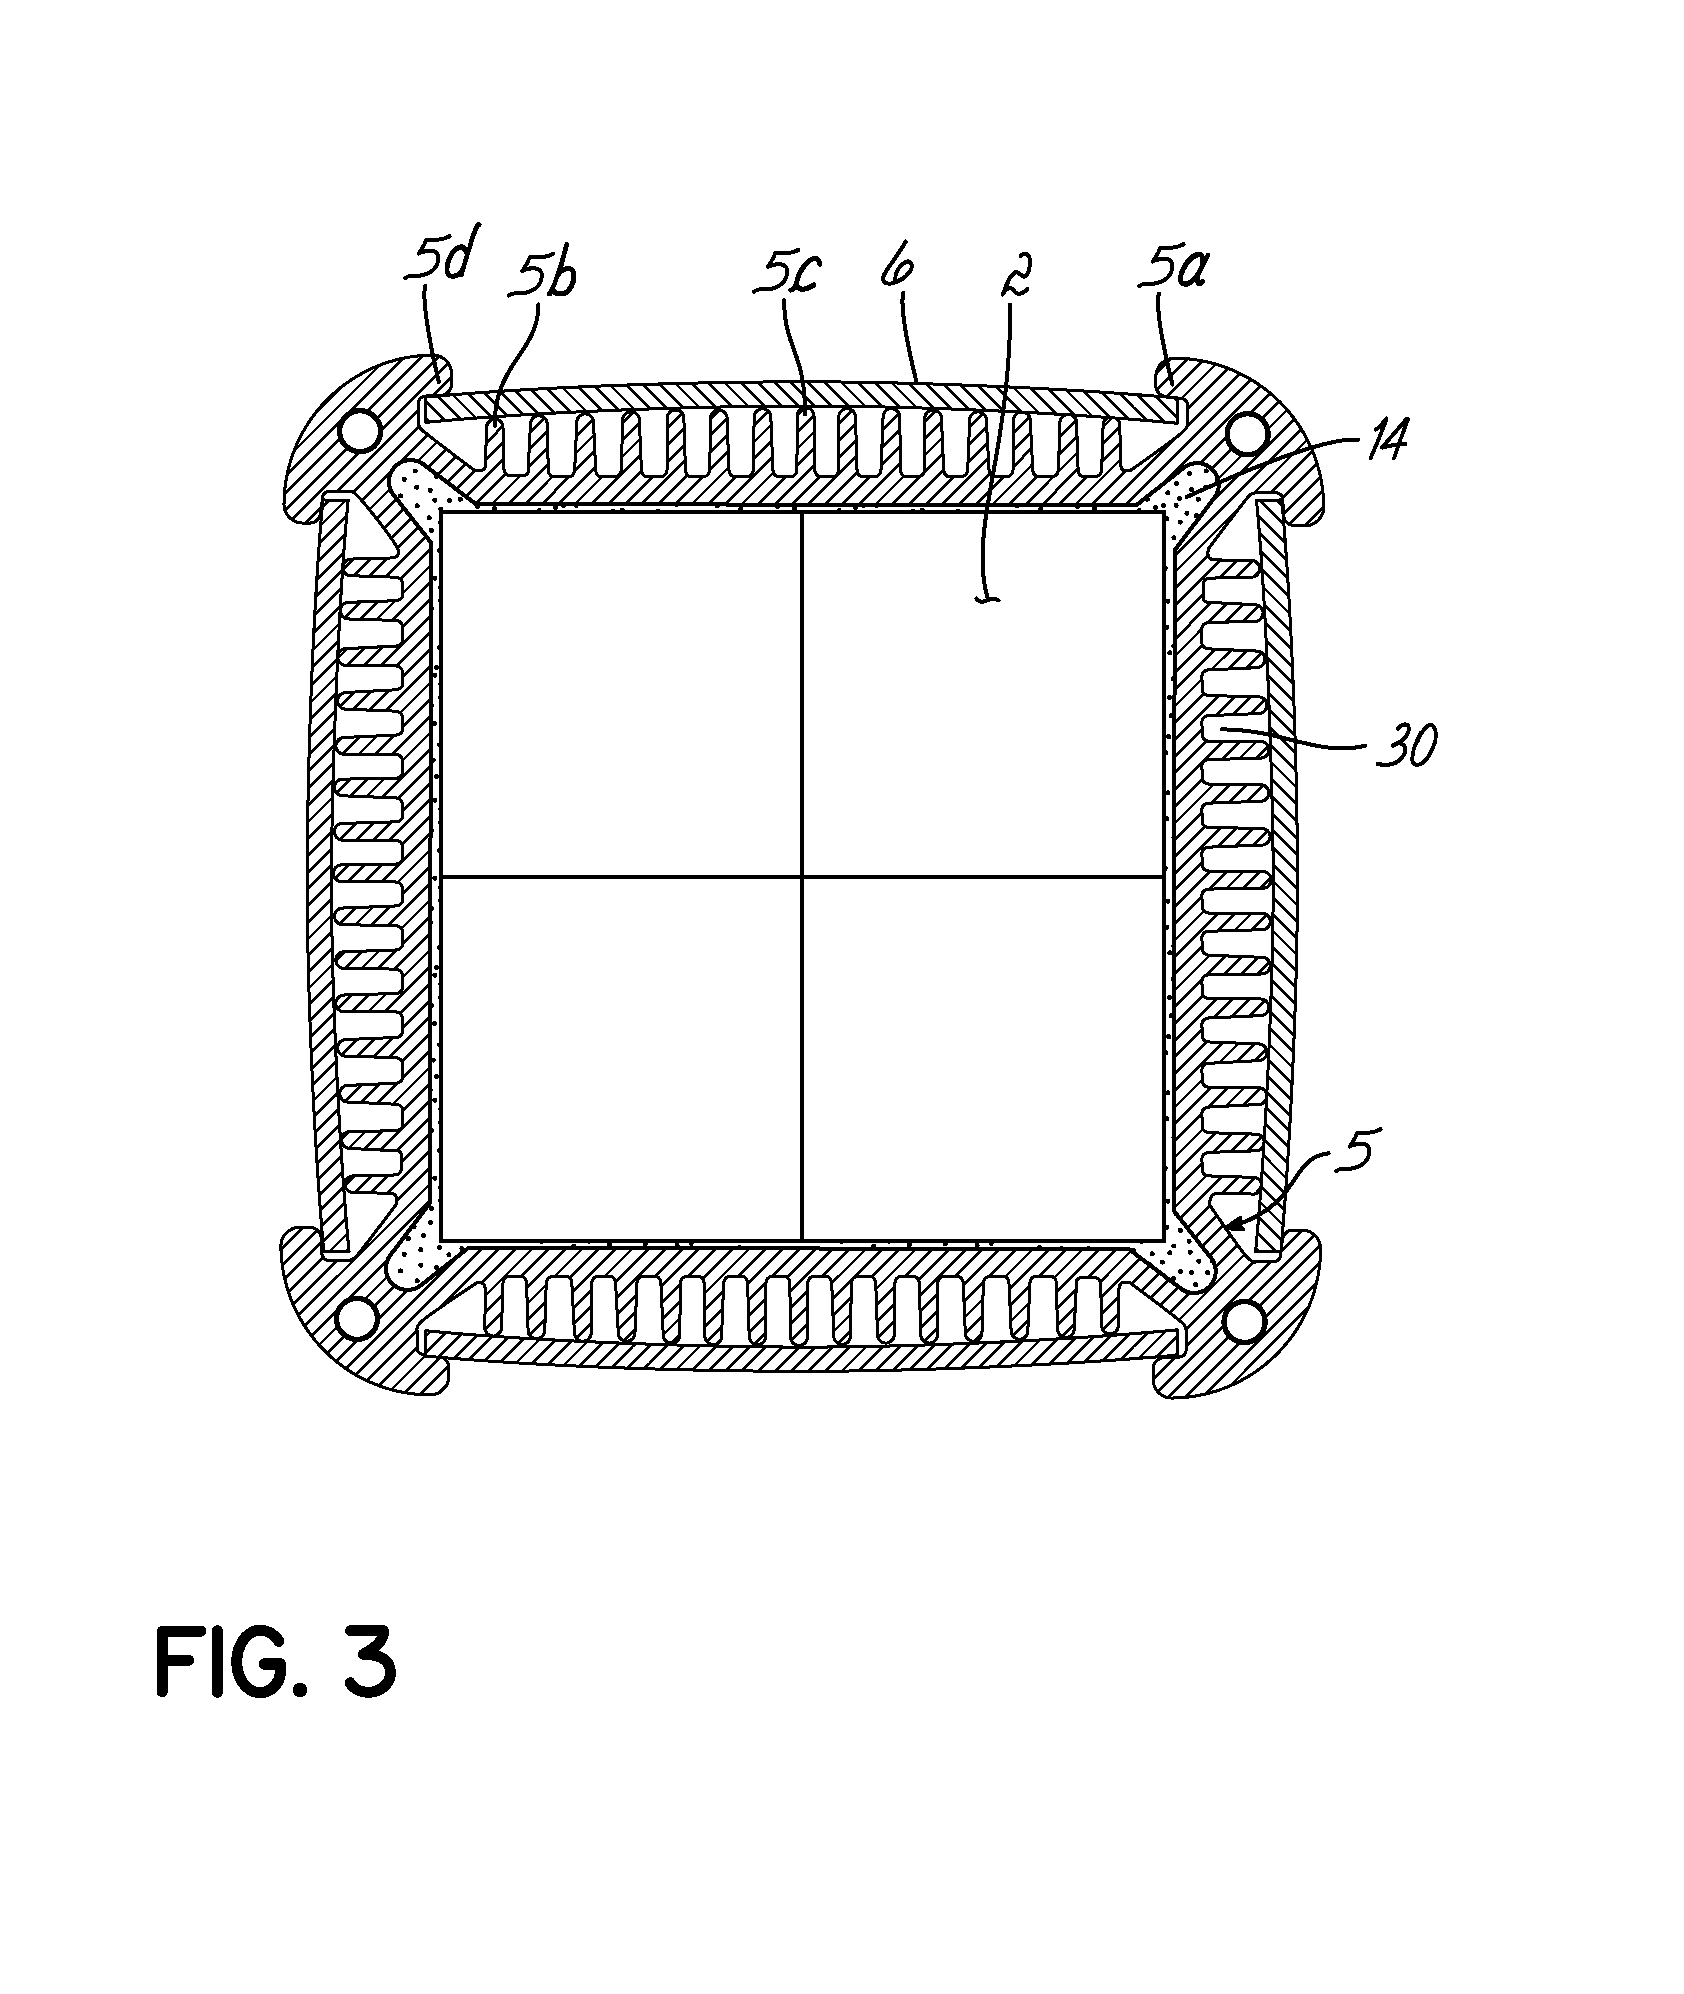 Power transmission tool and system